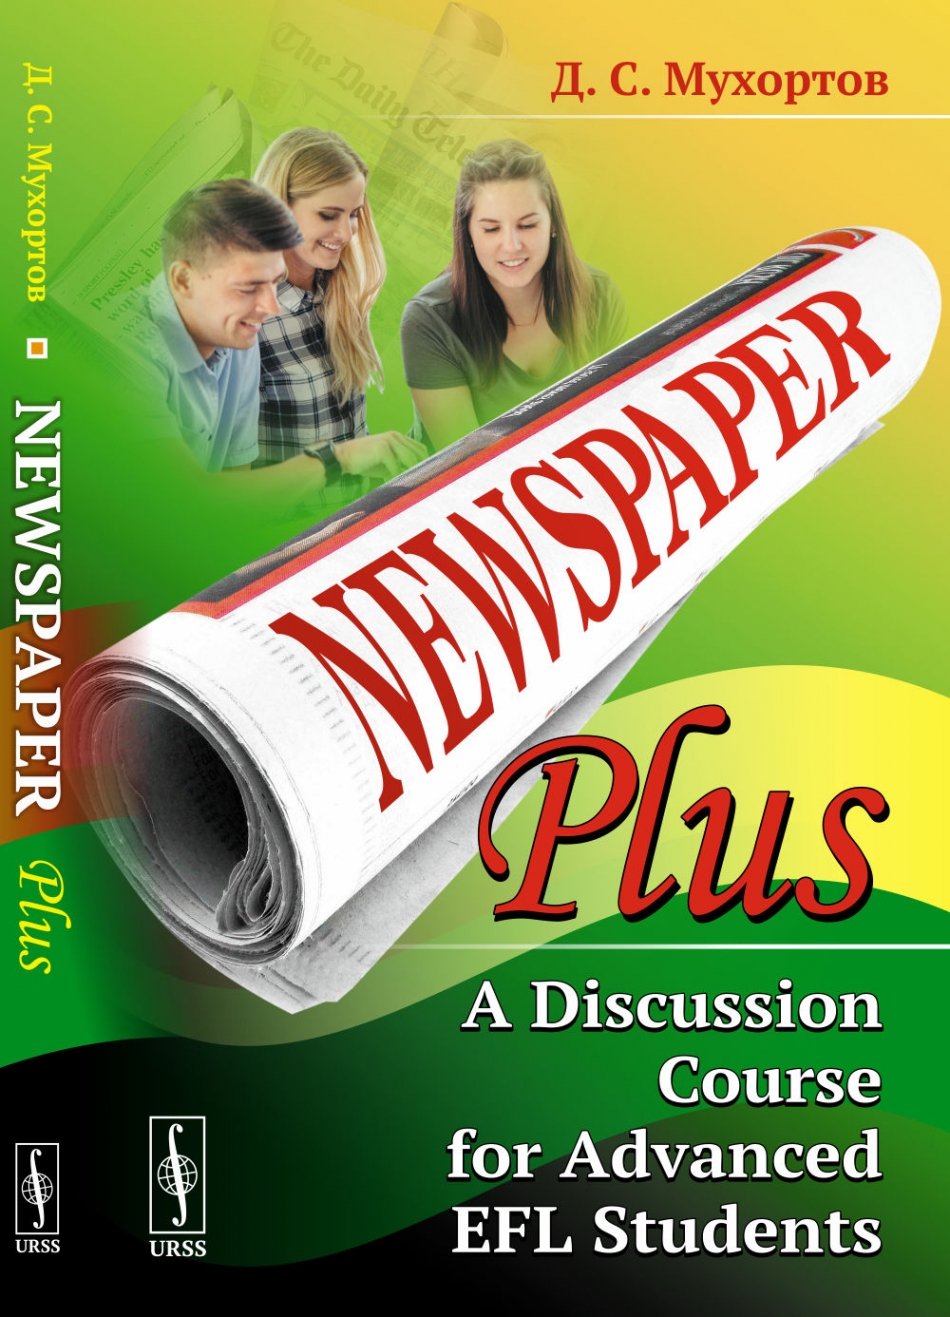  .. Newspaper Plus: A Discussion Course for Advanced EFL Students:               (   ).  